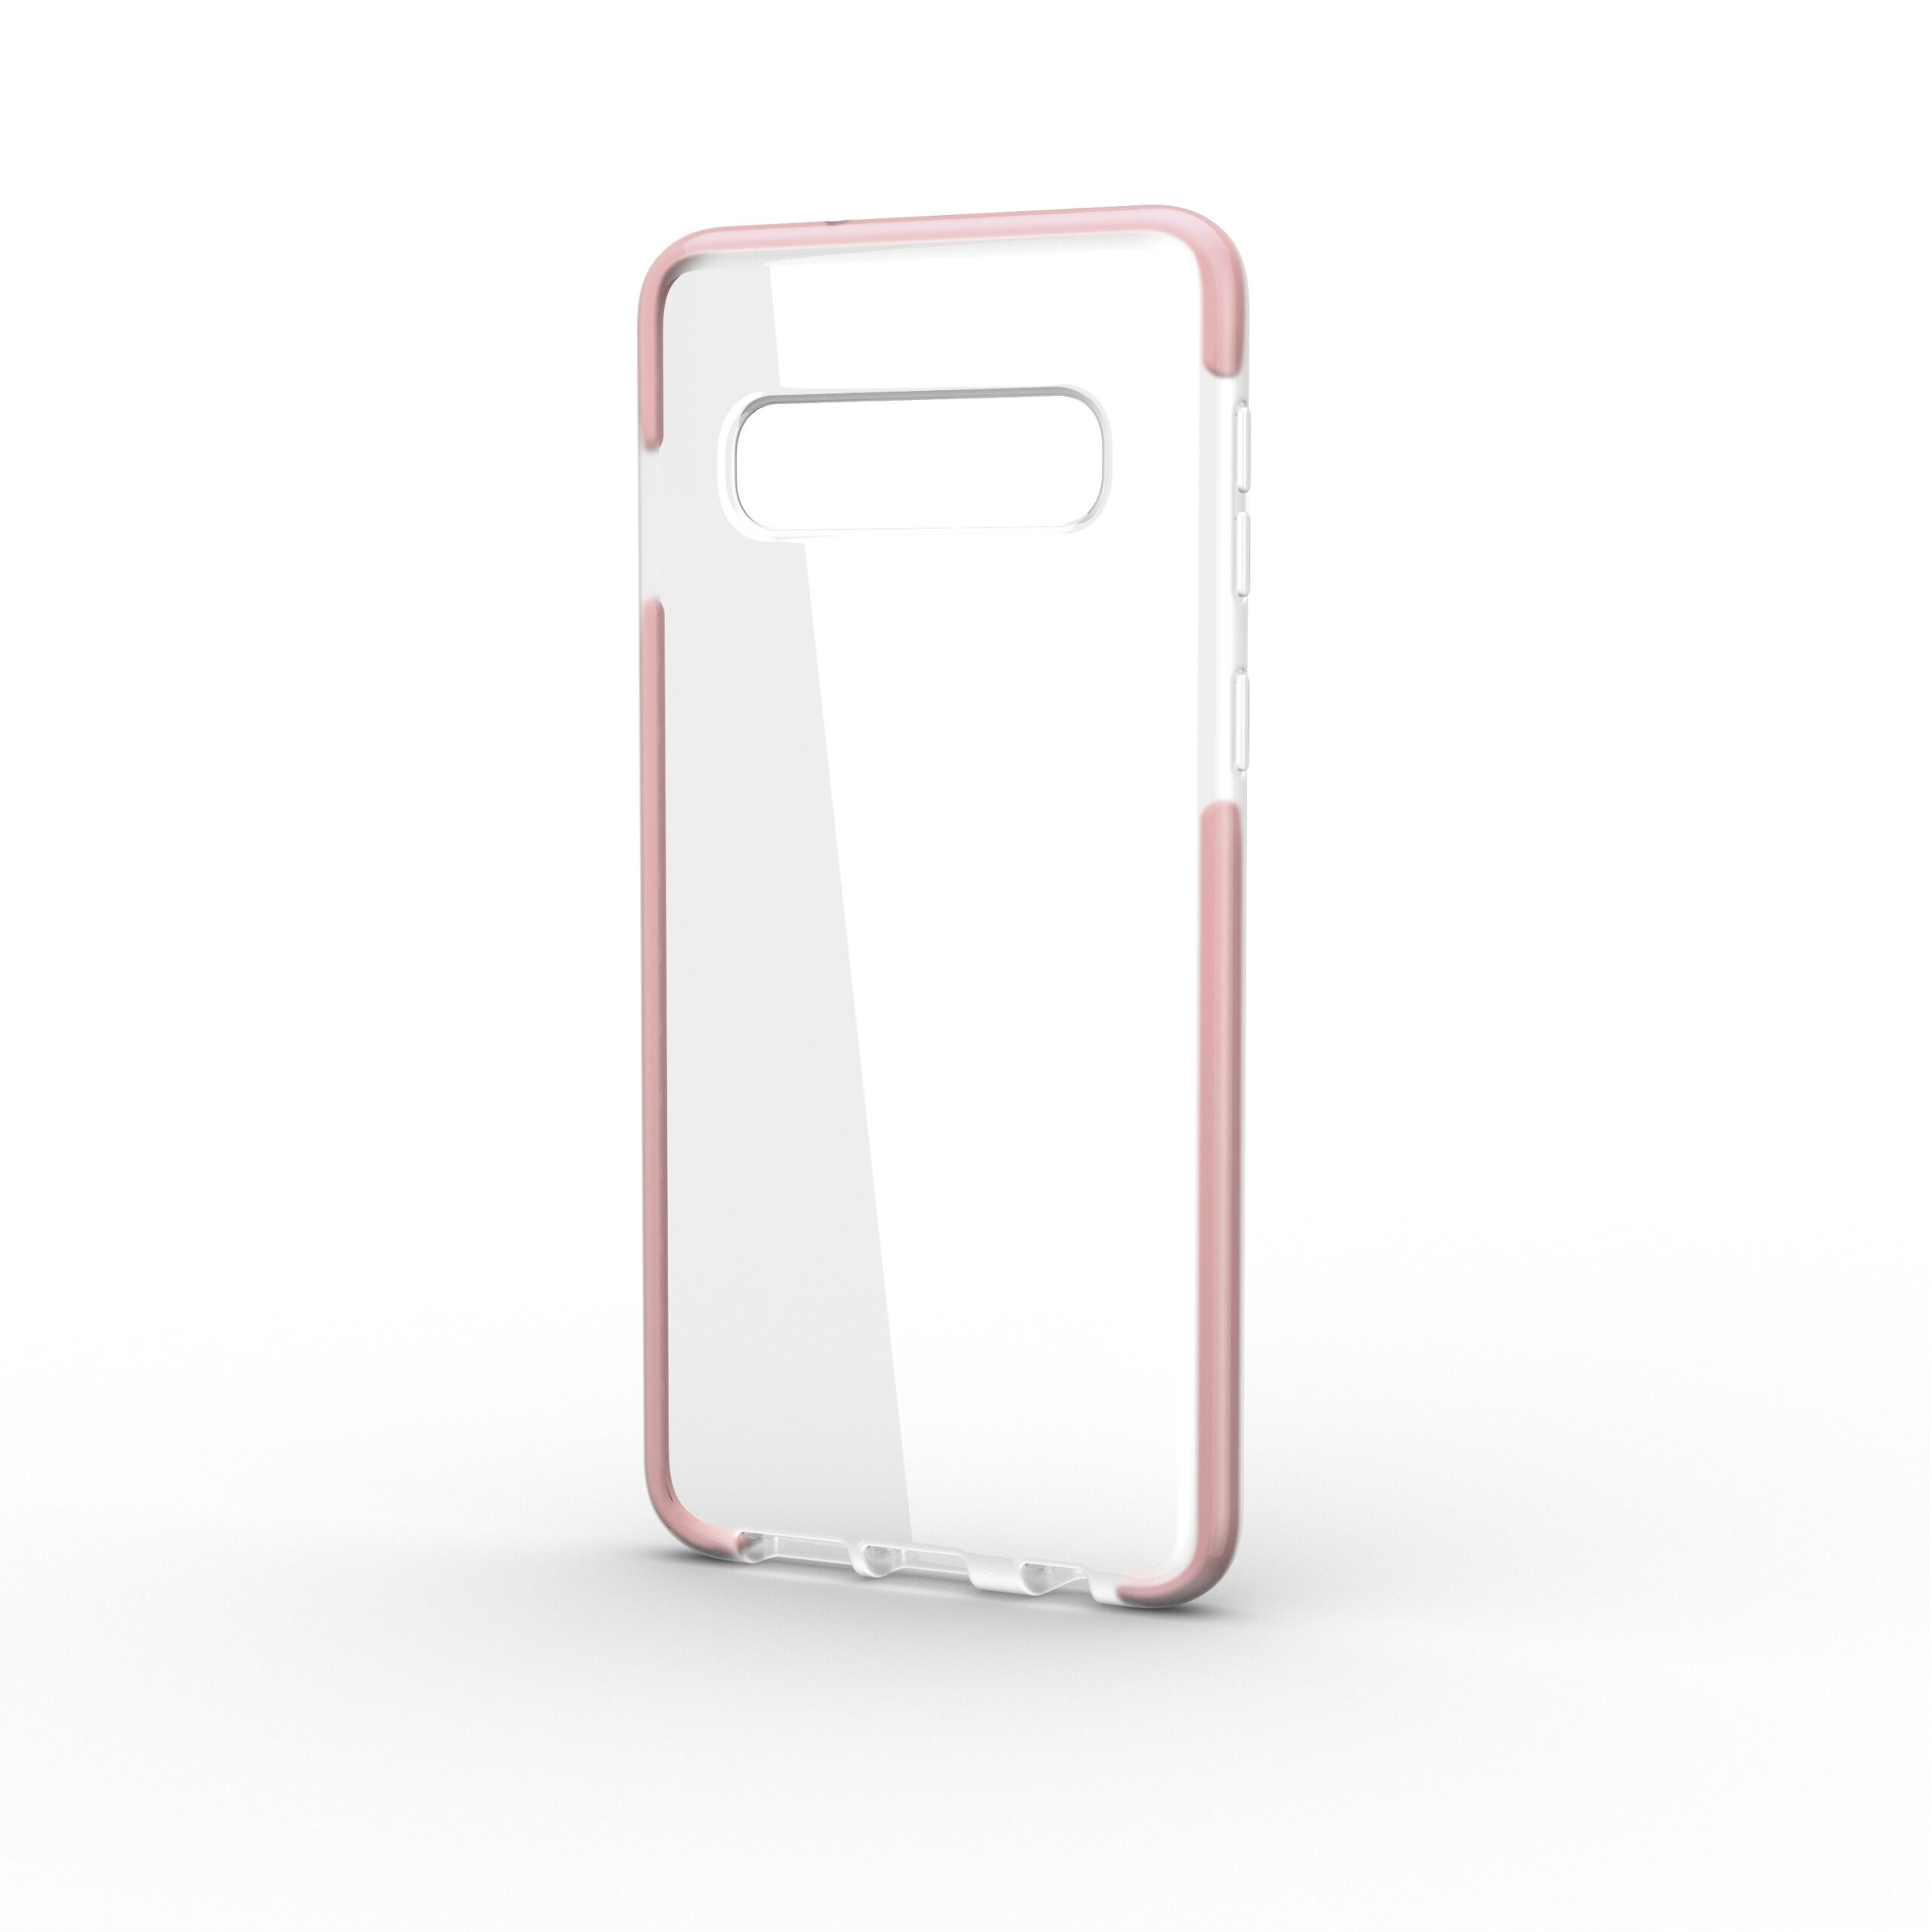 Base BorderLine - Dual Border Impact Protection for Samsung Galaxy S10e - Pink